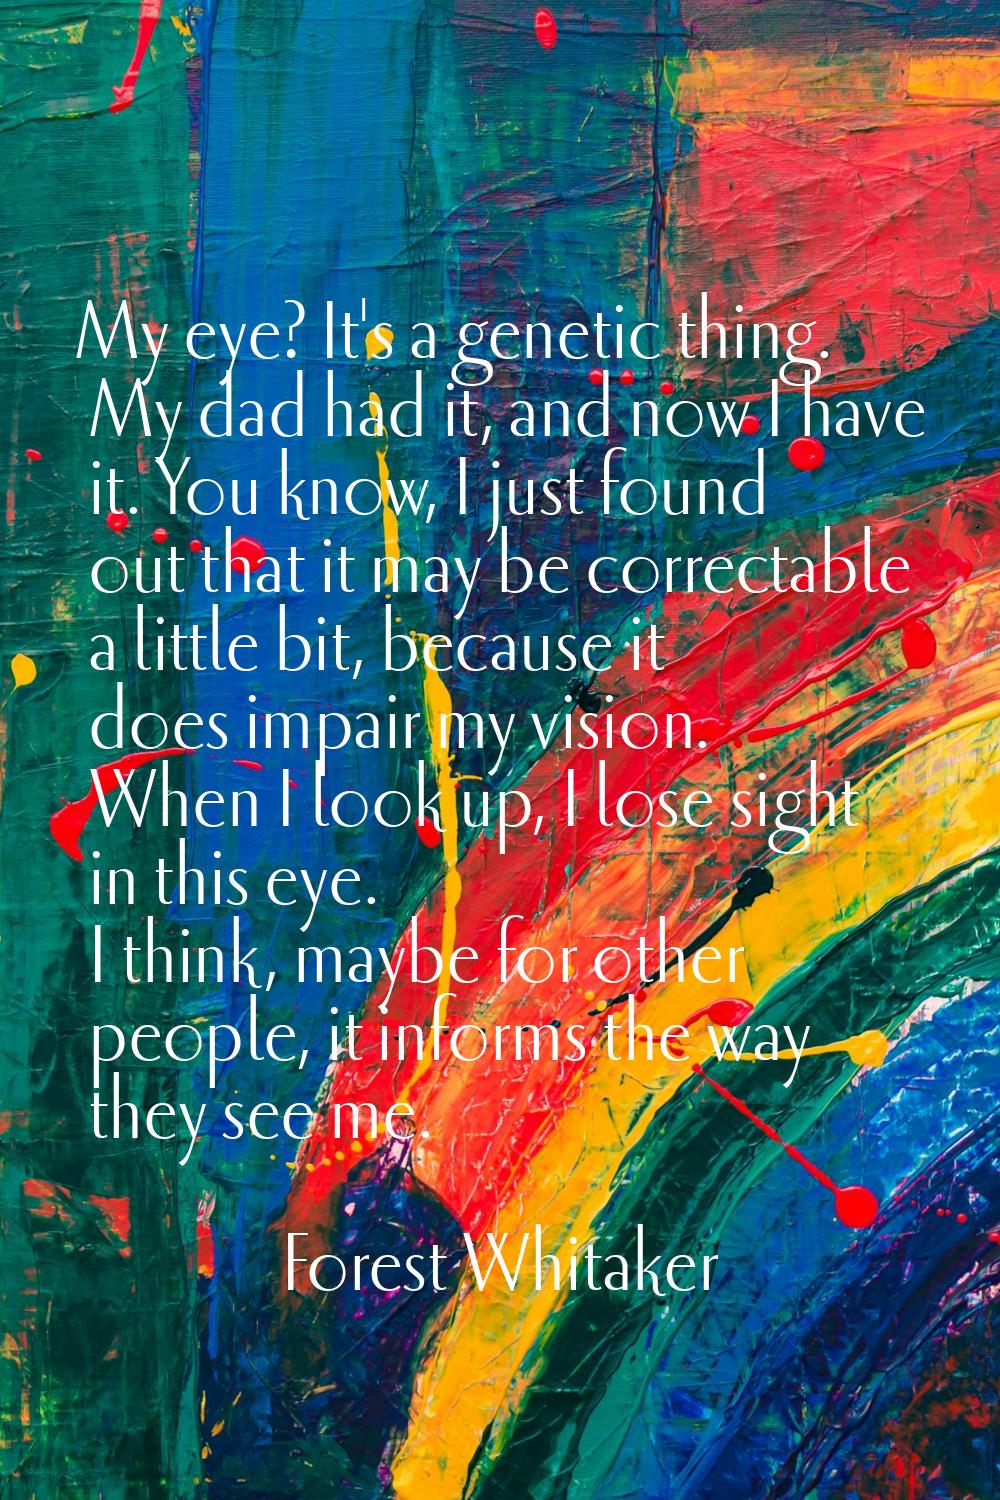 My eye? It's a genetic thing. My dad had it, and now I have it. You know, I just found out that it 